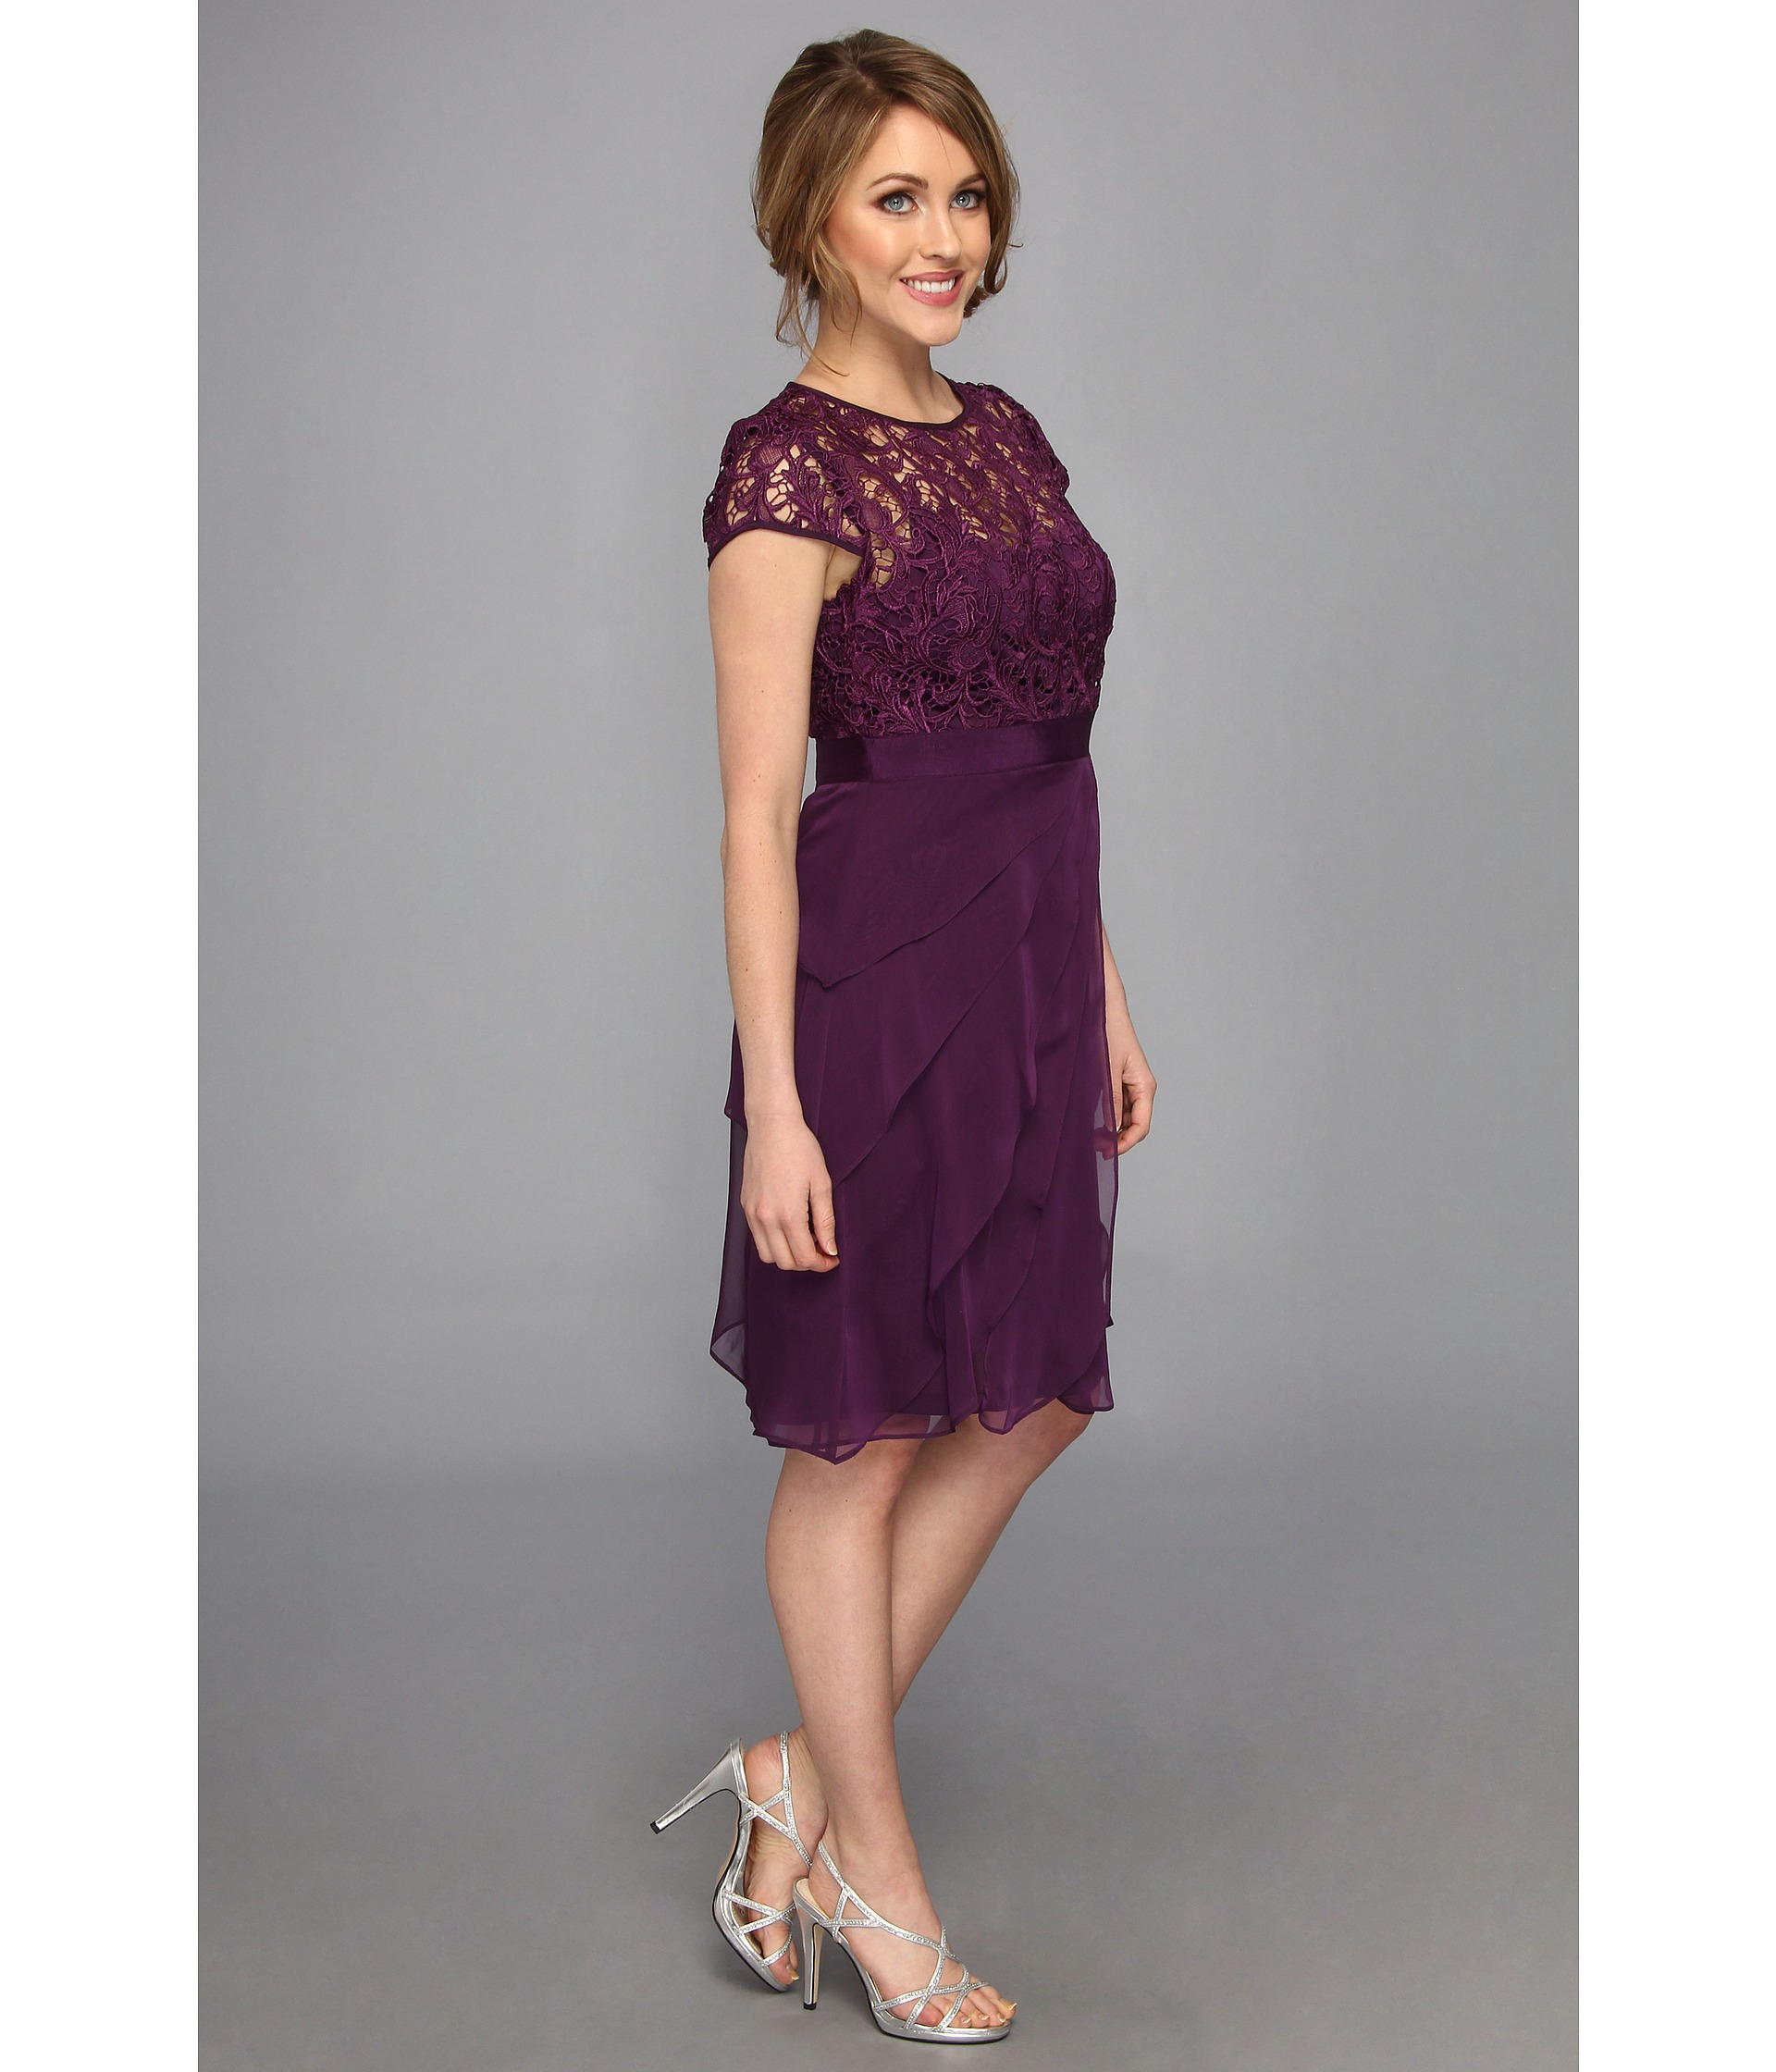 Adrianna Papell Lace Bodice Flutter Skirt Short Dress in Purple - Lyst